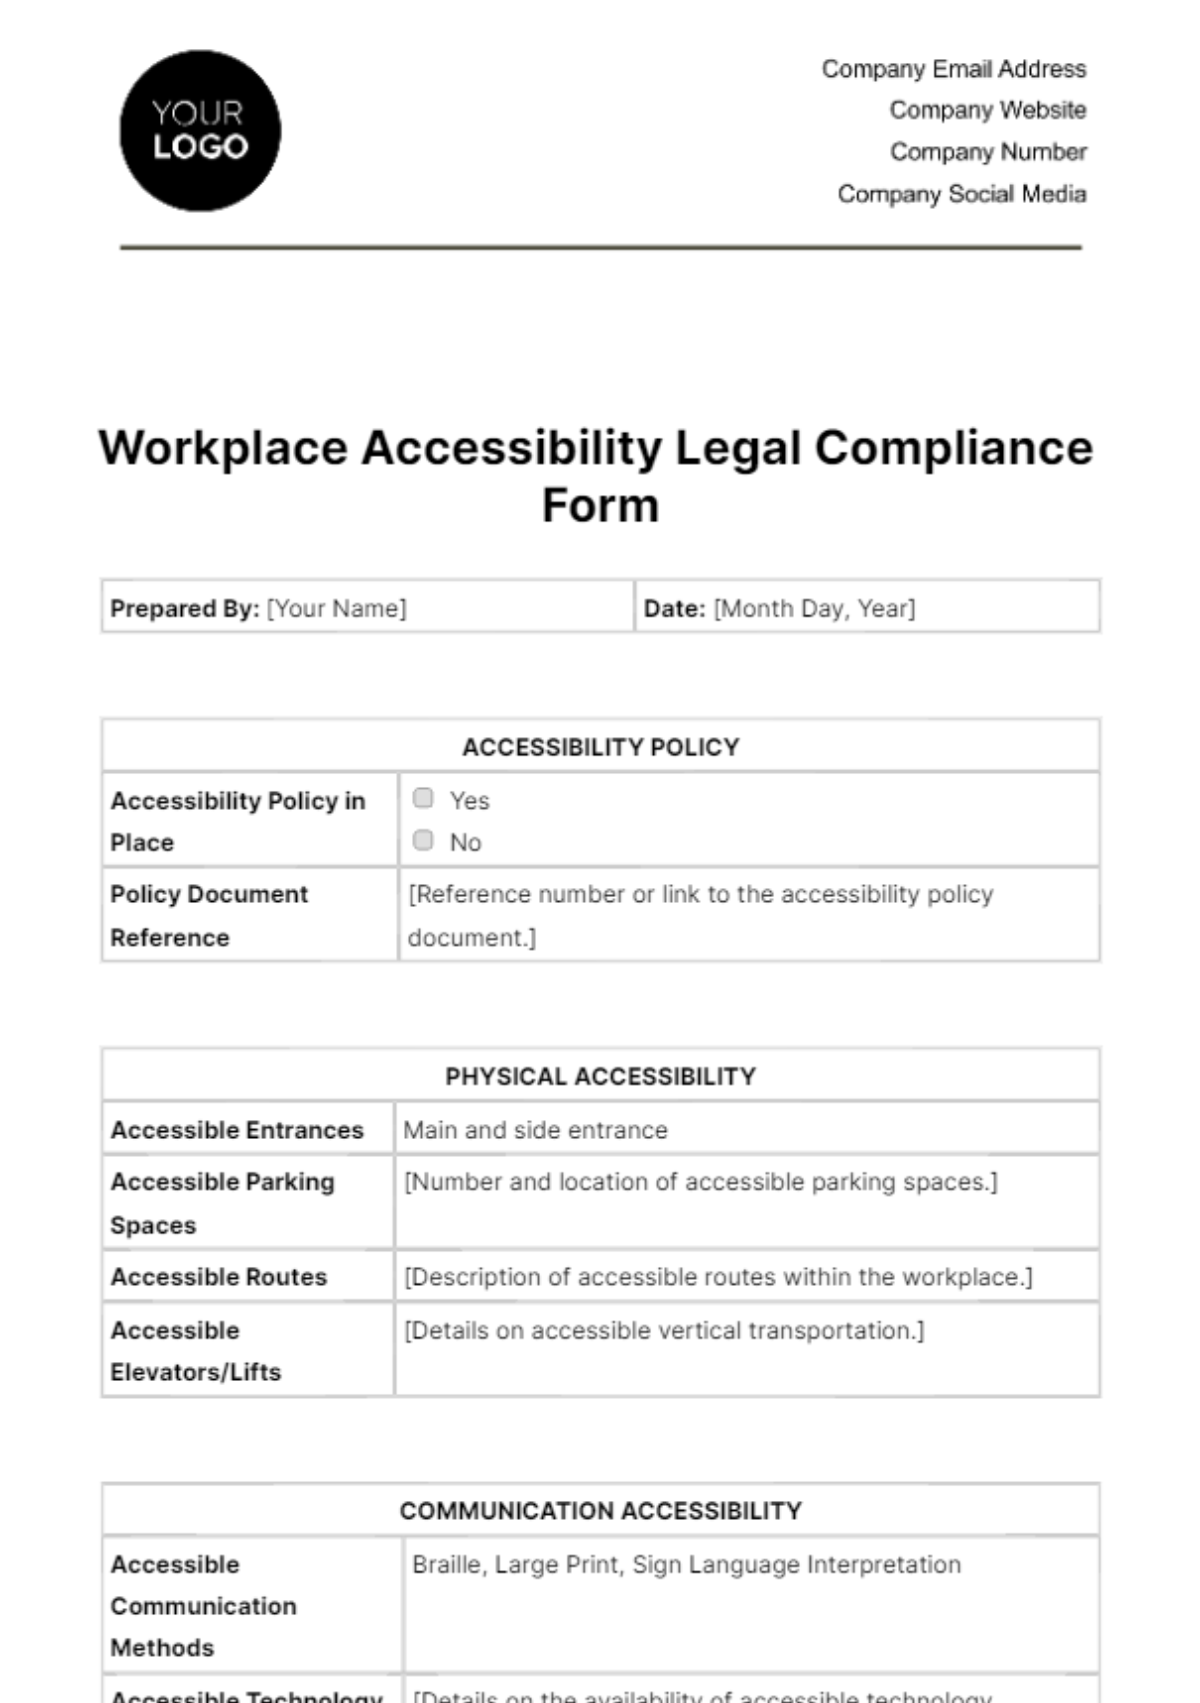 Free Workplace Accessibility Legal Compliance Form Template